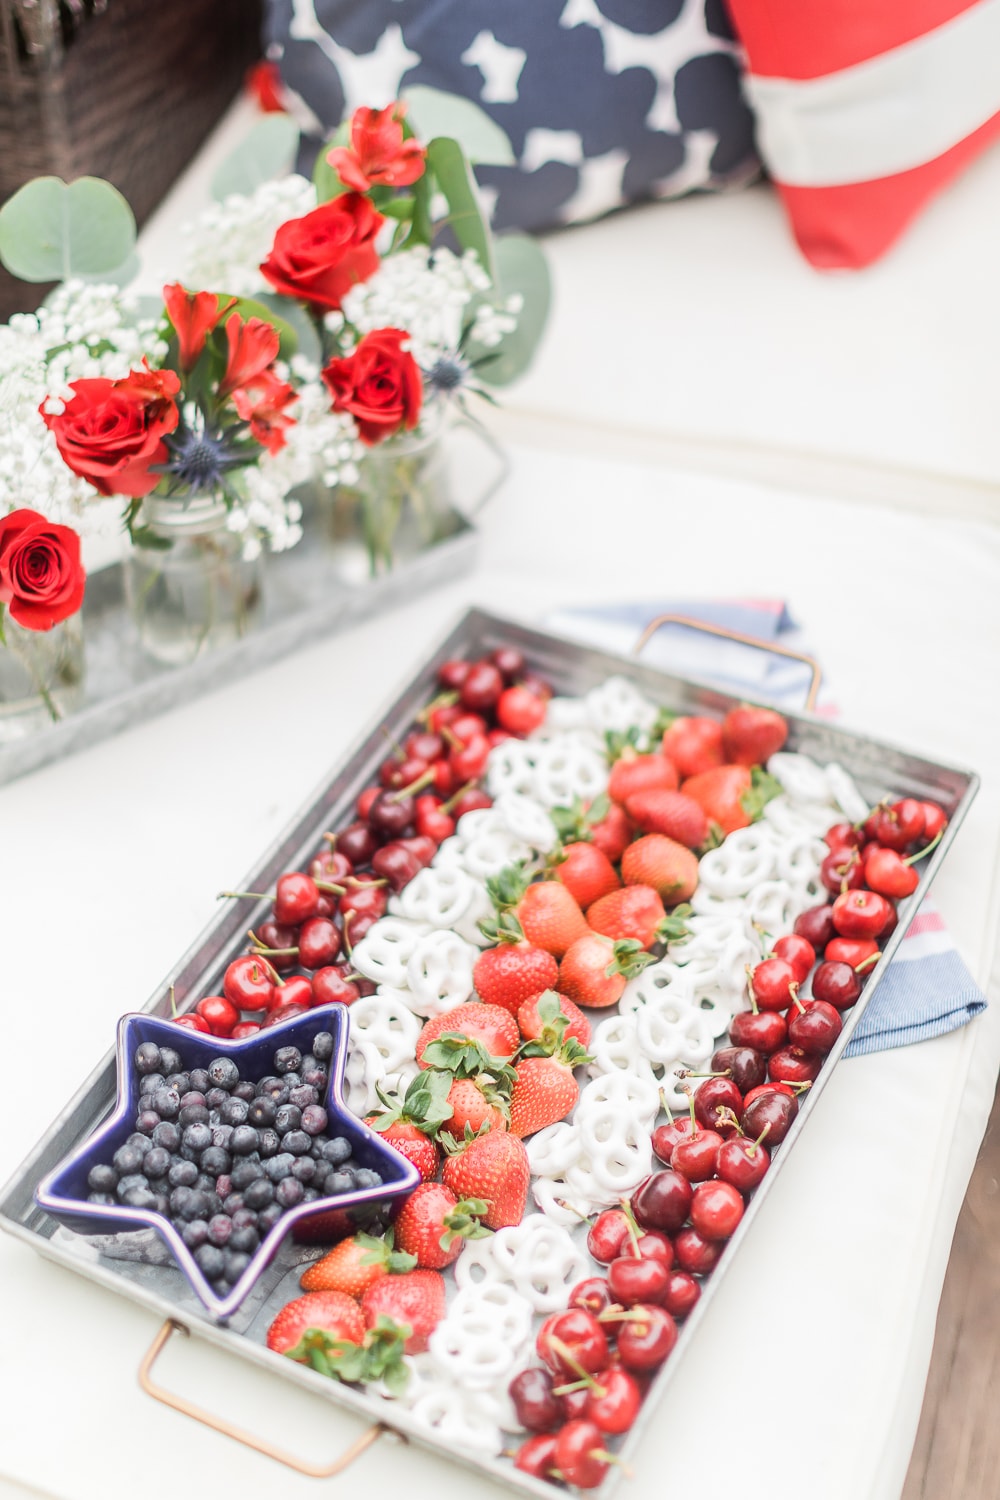 Red white and blue Labor Day fruit platter idea created by blogger Stephanie Ziajka on Diary of a Debutante